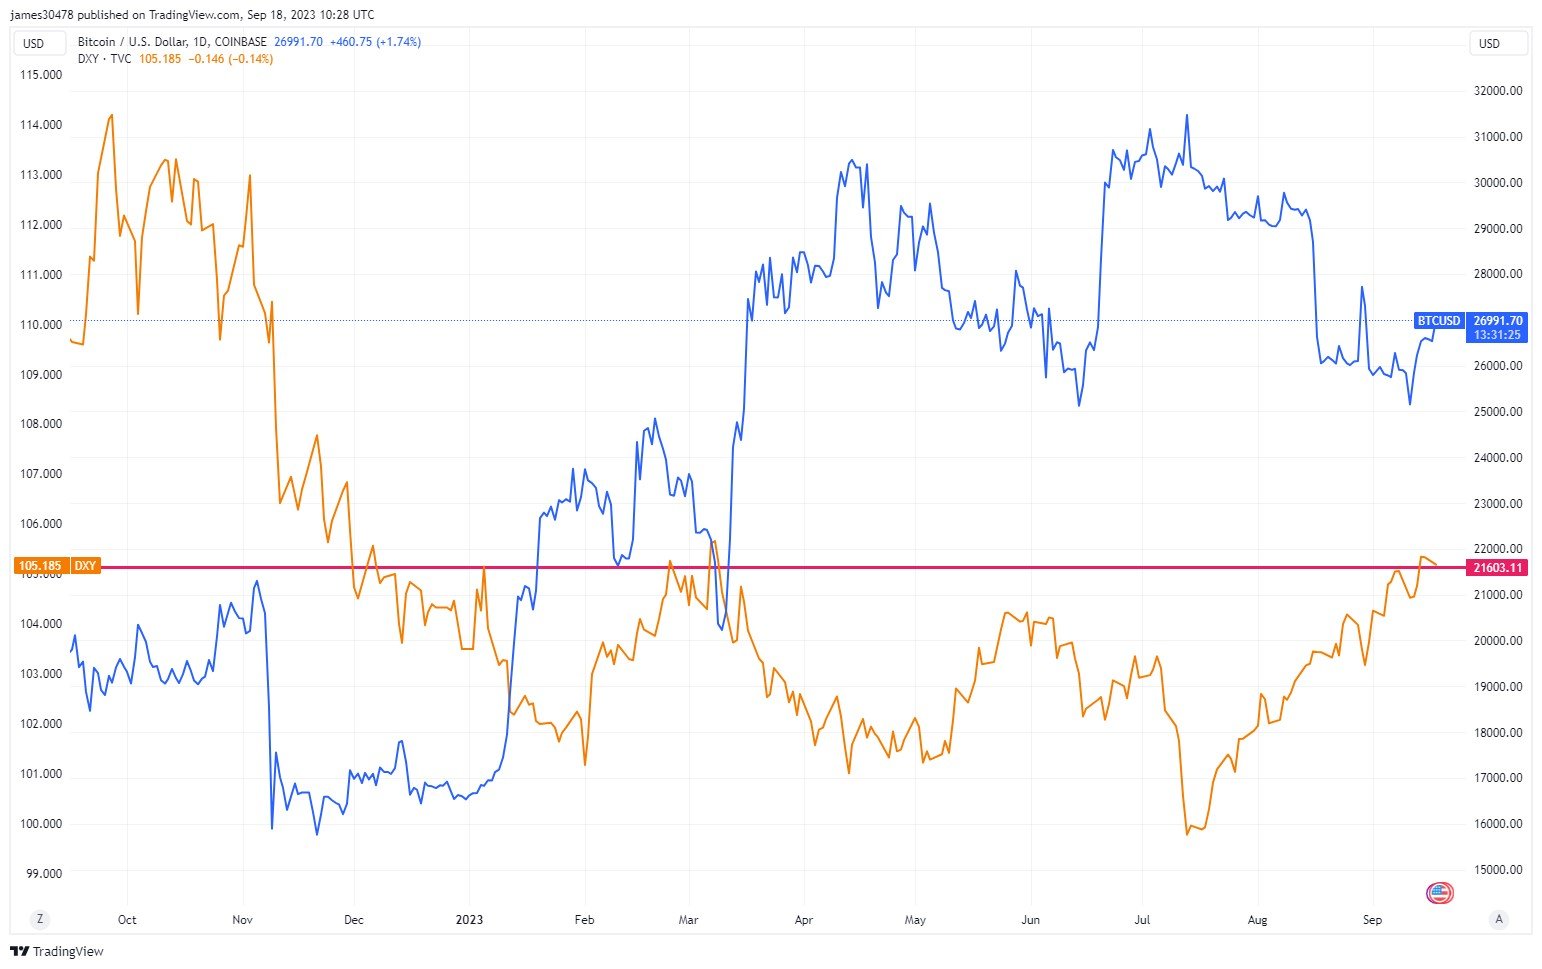 BTC:DXY relationship: (Source: Trading View)